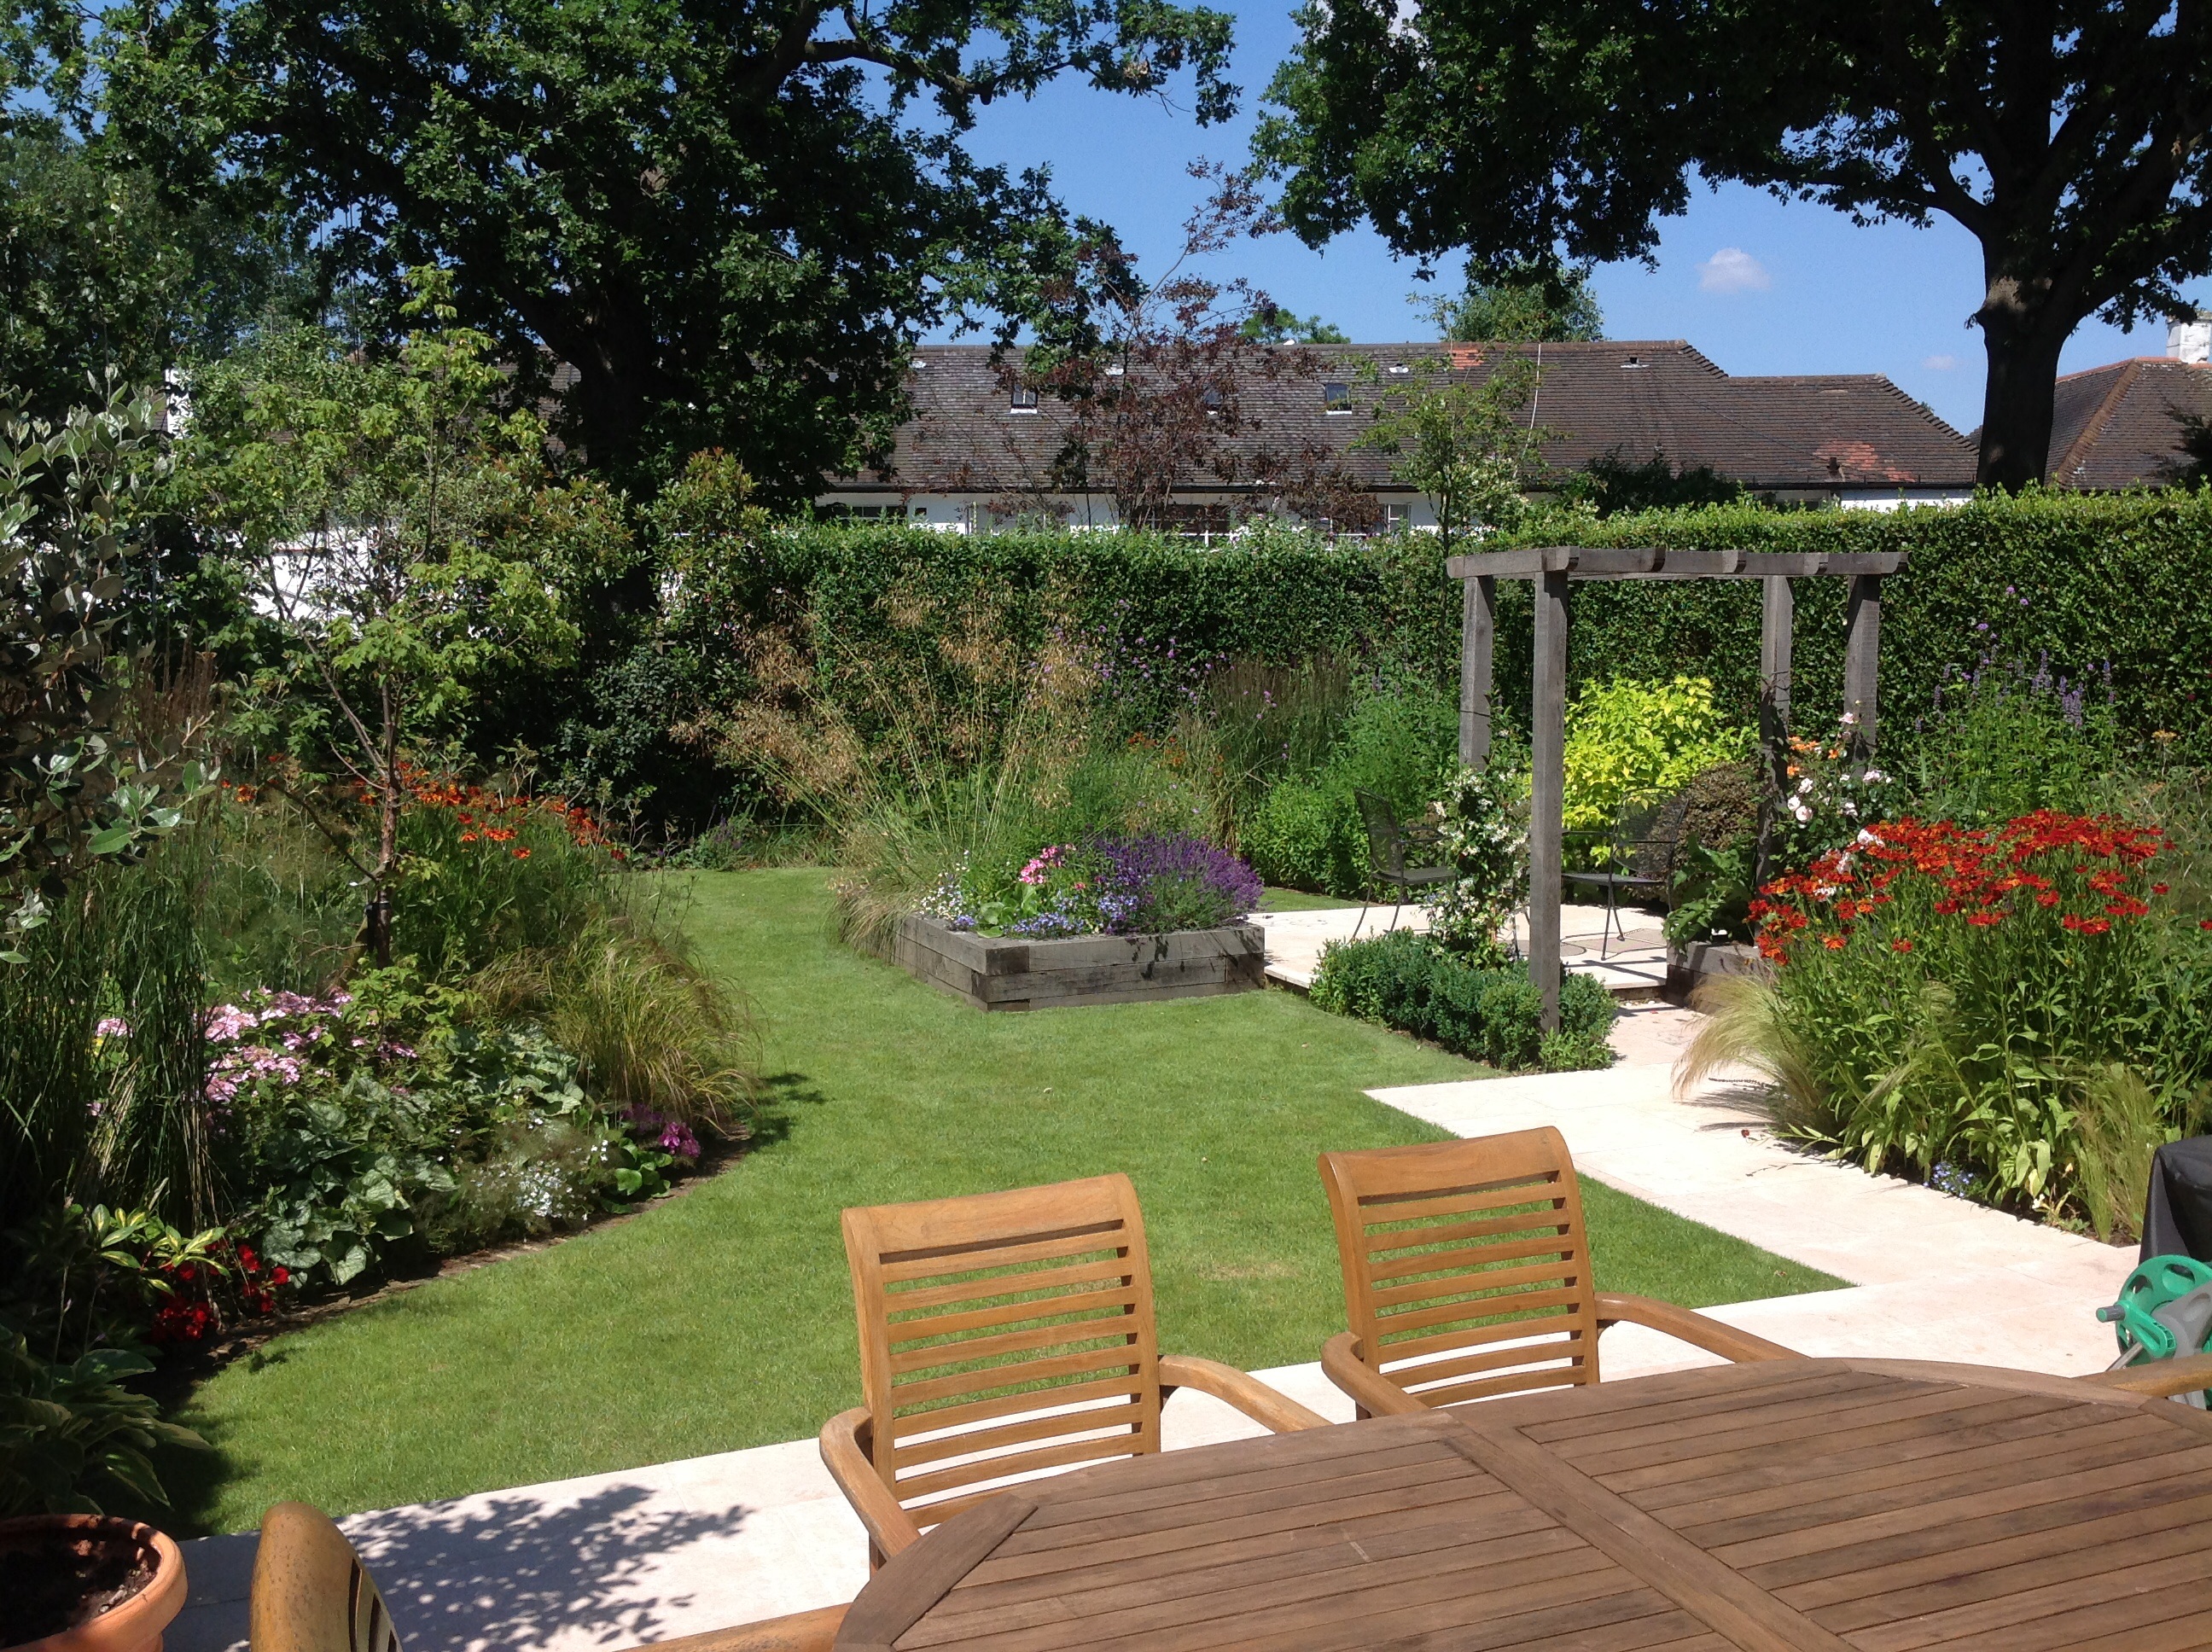 </p> <p>Find your ideal home design pro on designfor-me.com - get matched and see who's interested in your home project. Click image to see more inspiration from our design pros</p> <p>Design by James, garden designer from Woking, South East</p> <p> #gardendesign #gardeninspiration #gardenlove #gardenideas #gardens </p> <p>